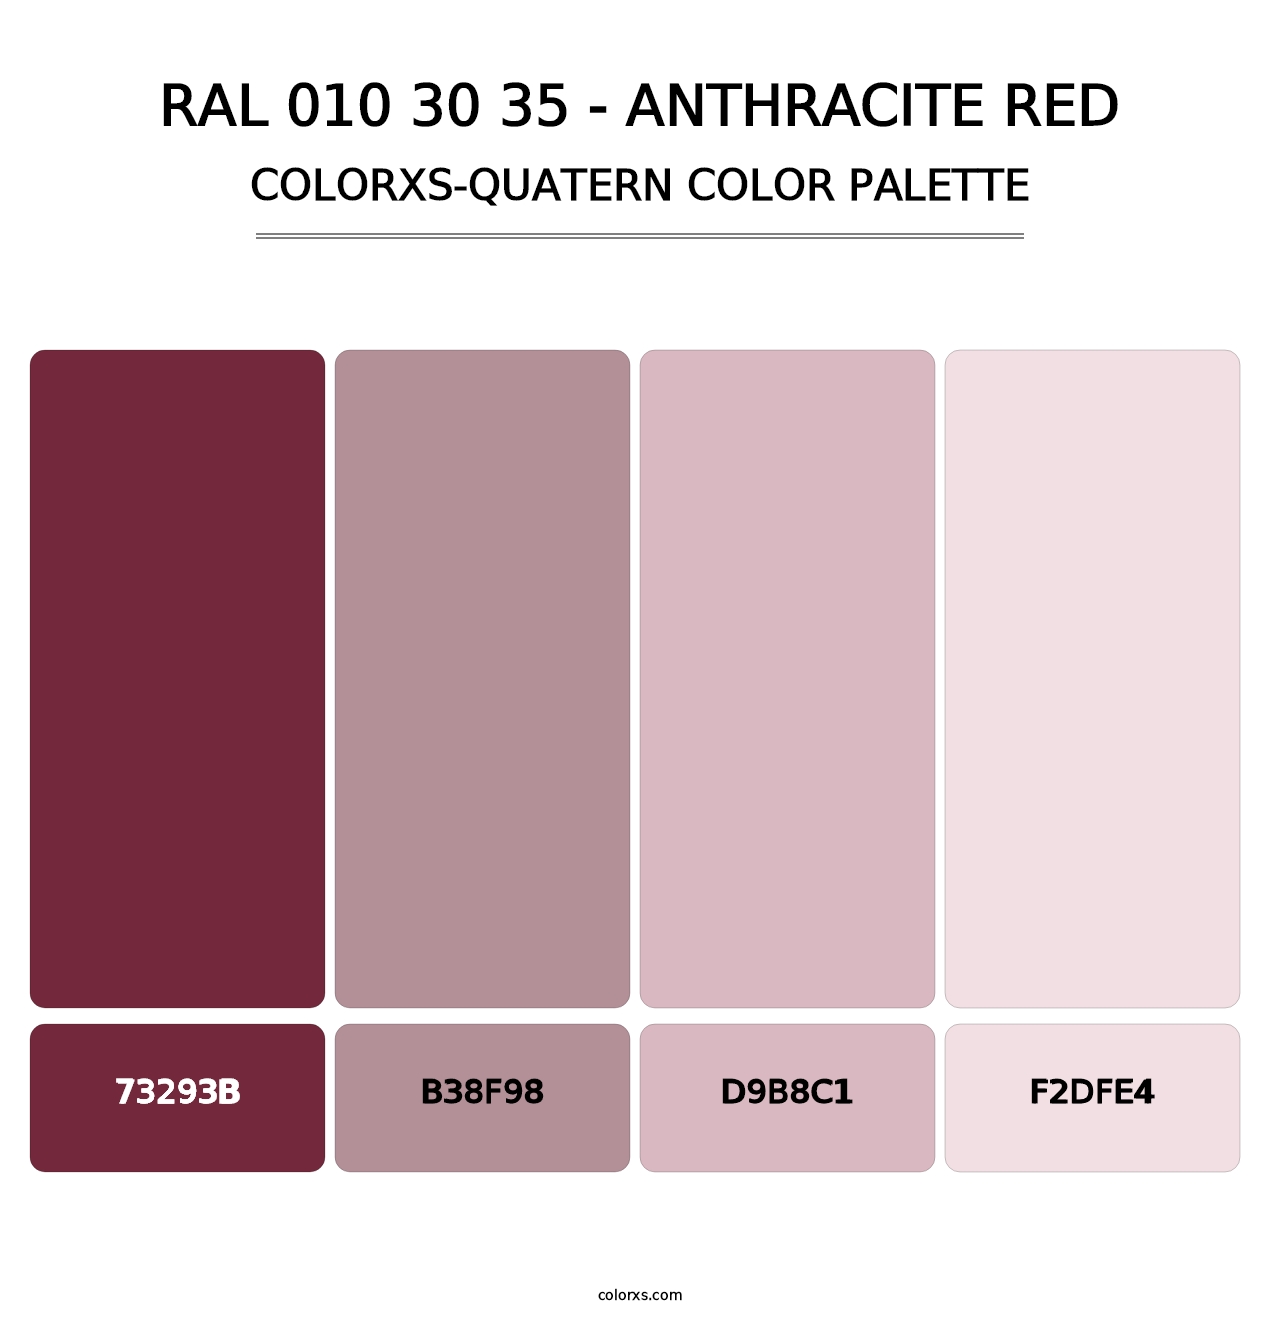 RAL 010 30 35 - Anthracite Red - Colorxs Quatern Palette